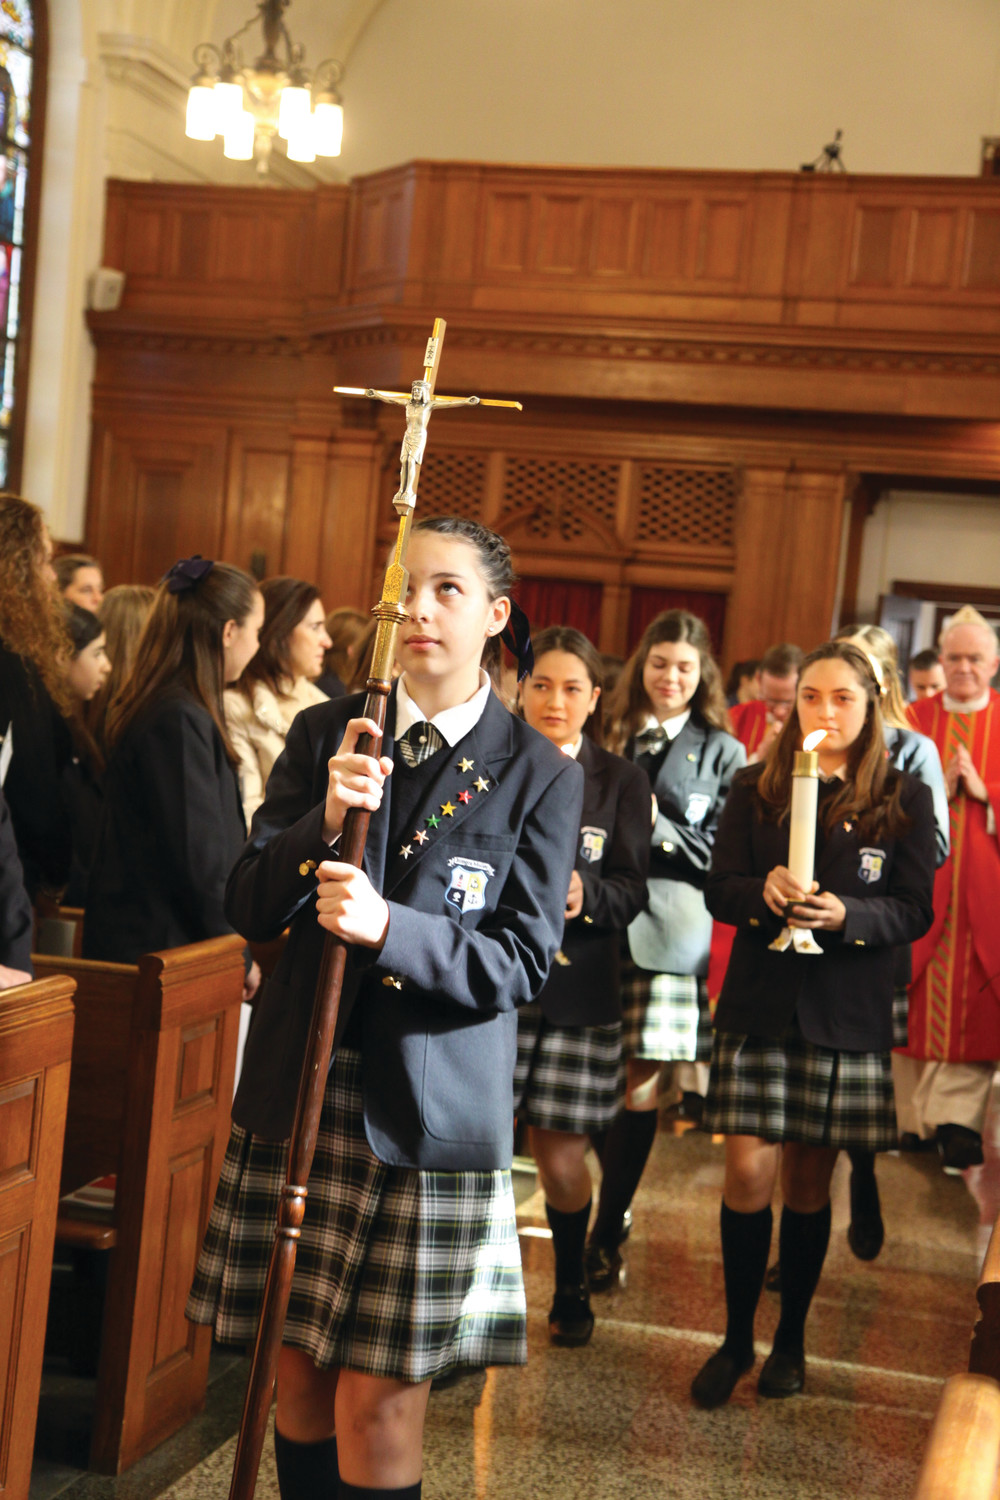 Jimena Ossio carries the cross during a school Mass celebrating the sacrament of confirmation at Overbrook Academy, Greenville. On February 28, twenty-six students received the sacrament at the international Catholic boarding school.